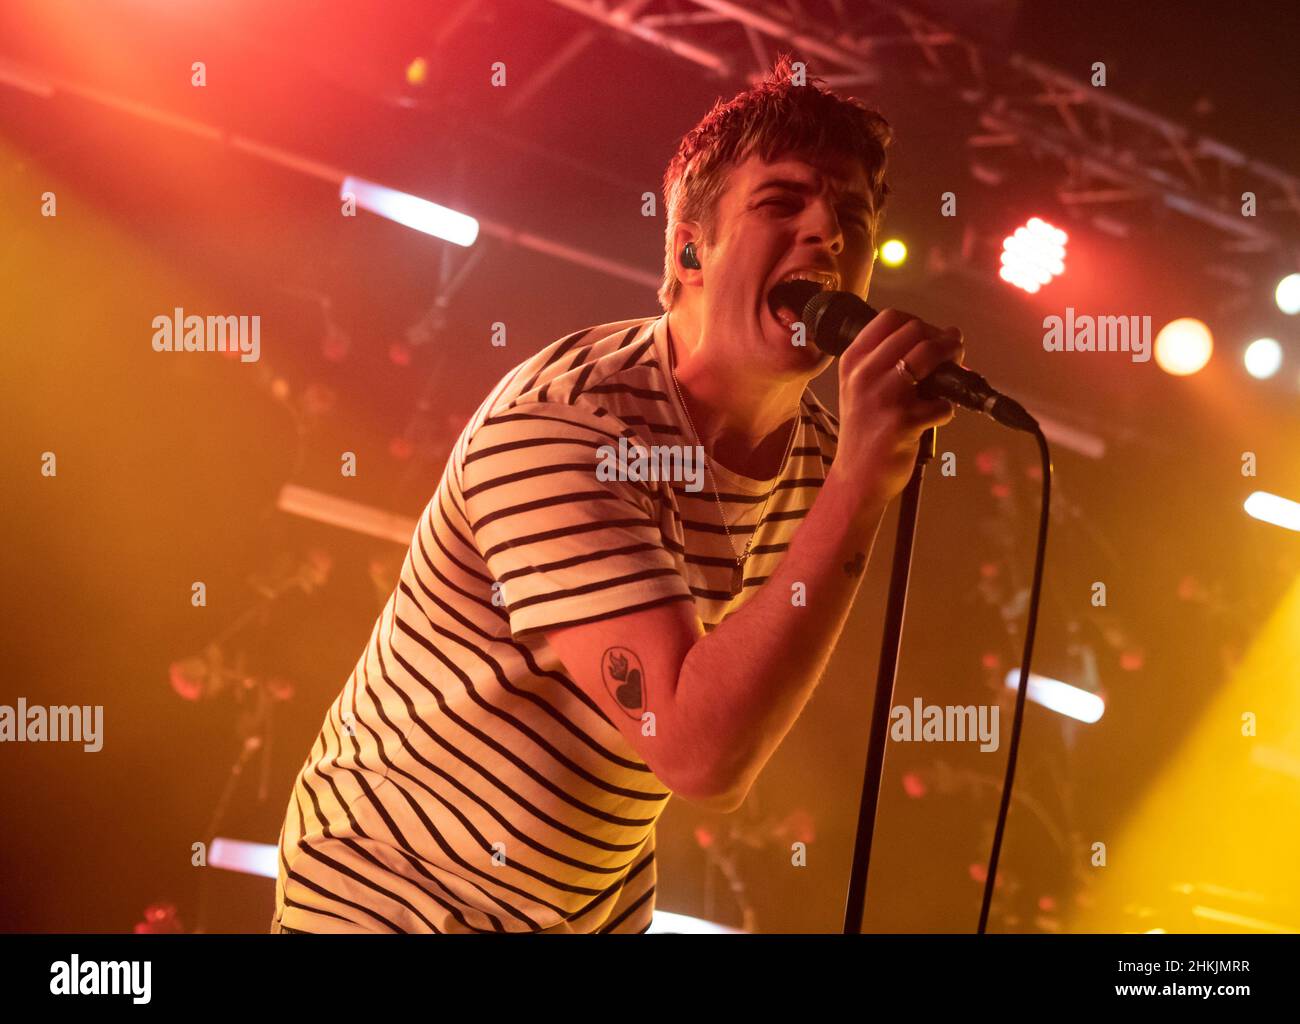 London, UK. 04th Feb, 2022. February 4th, 2022. London, UK. Grian Chatten of Fontaines D.C. performing on stage at The Dome, London. Part of BRITs Week presented by Mastercard for War Child. Credit: Doug Peters/EMPICS/Alamy Live News Credit: Doug Peters/Alamy Live News Stock Photo